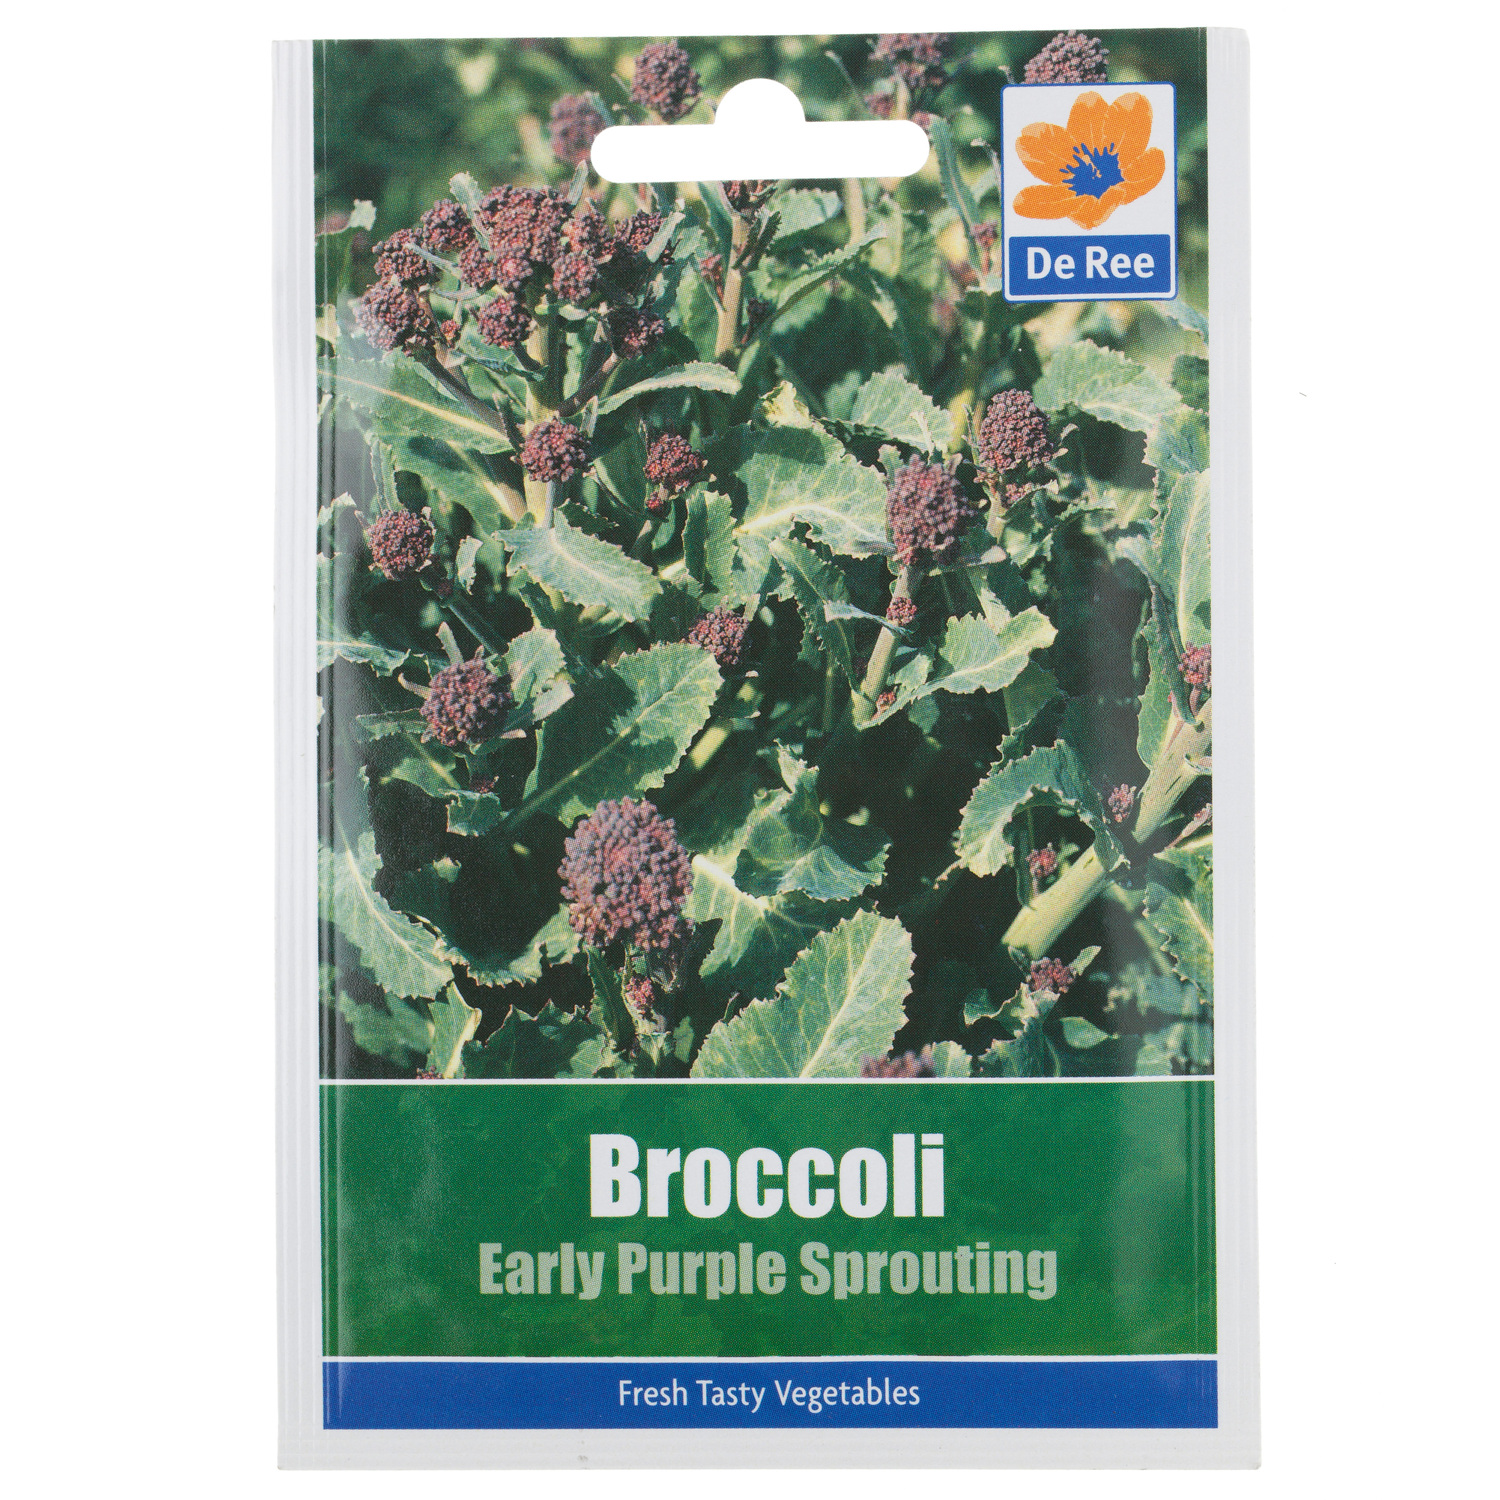 Broccoli Early Purple Sprouting Seed Packet Image